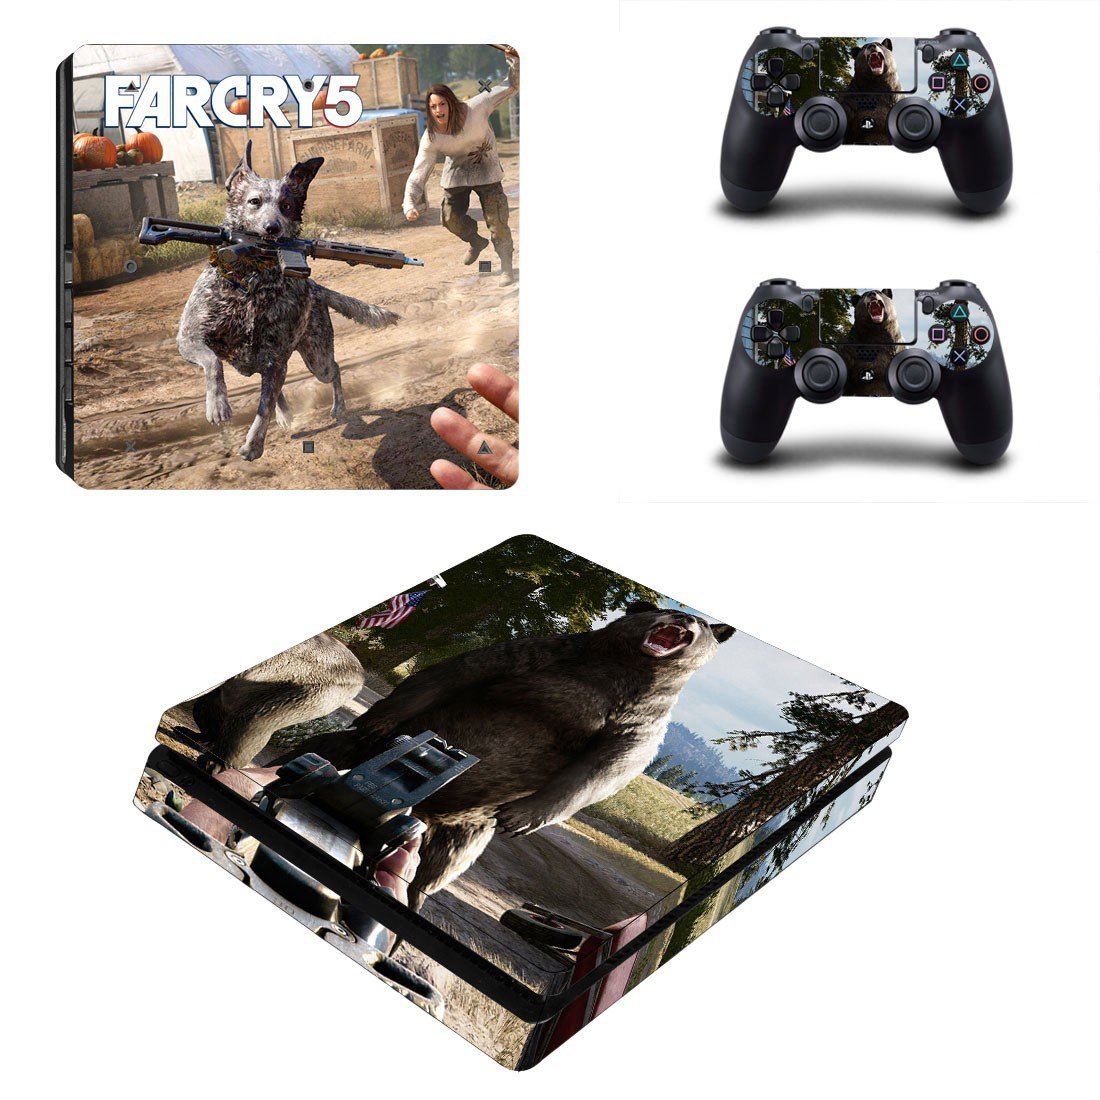 Skin Cover for PS4 Slim -Far Cry 5 Design 4